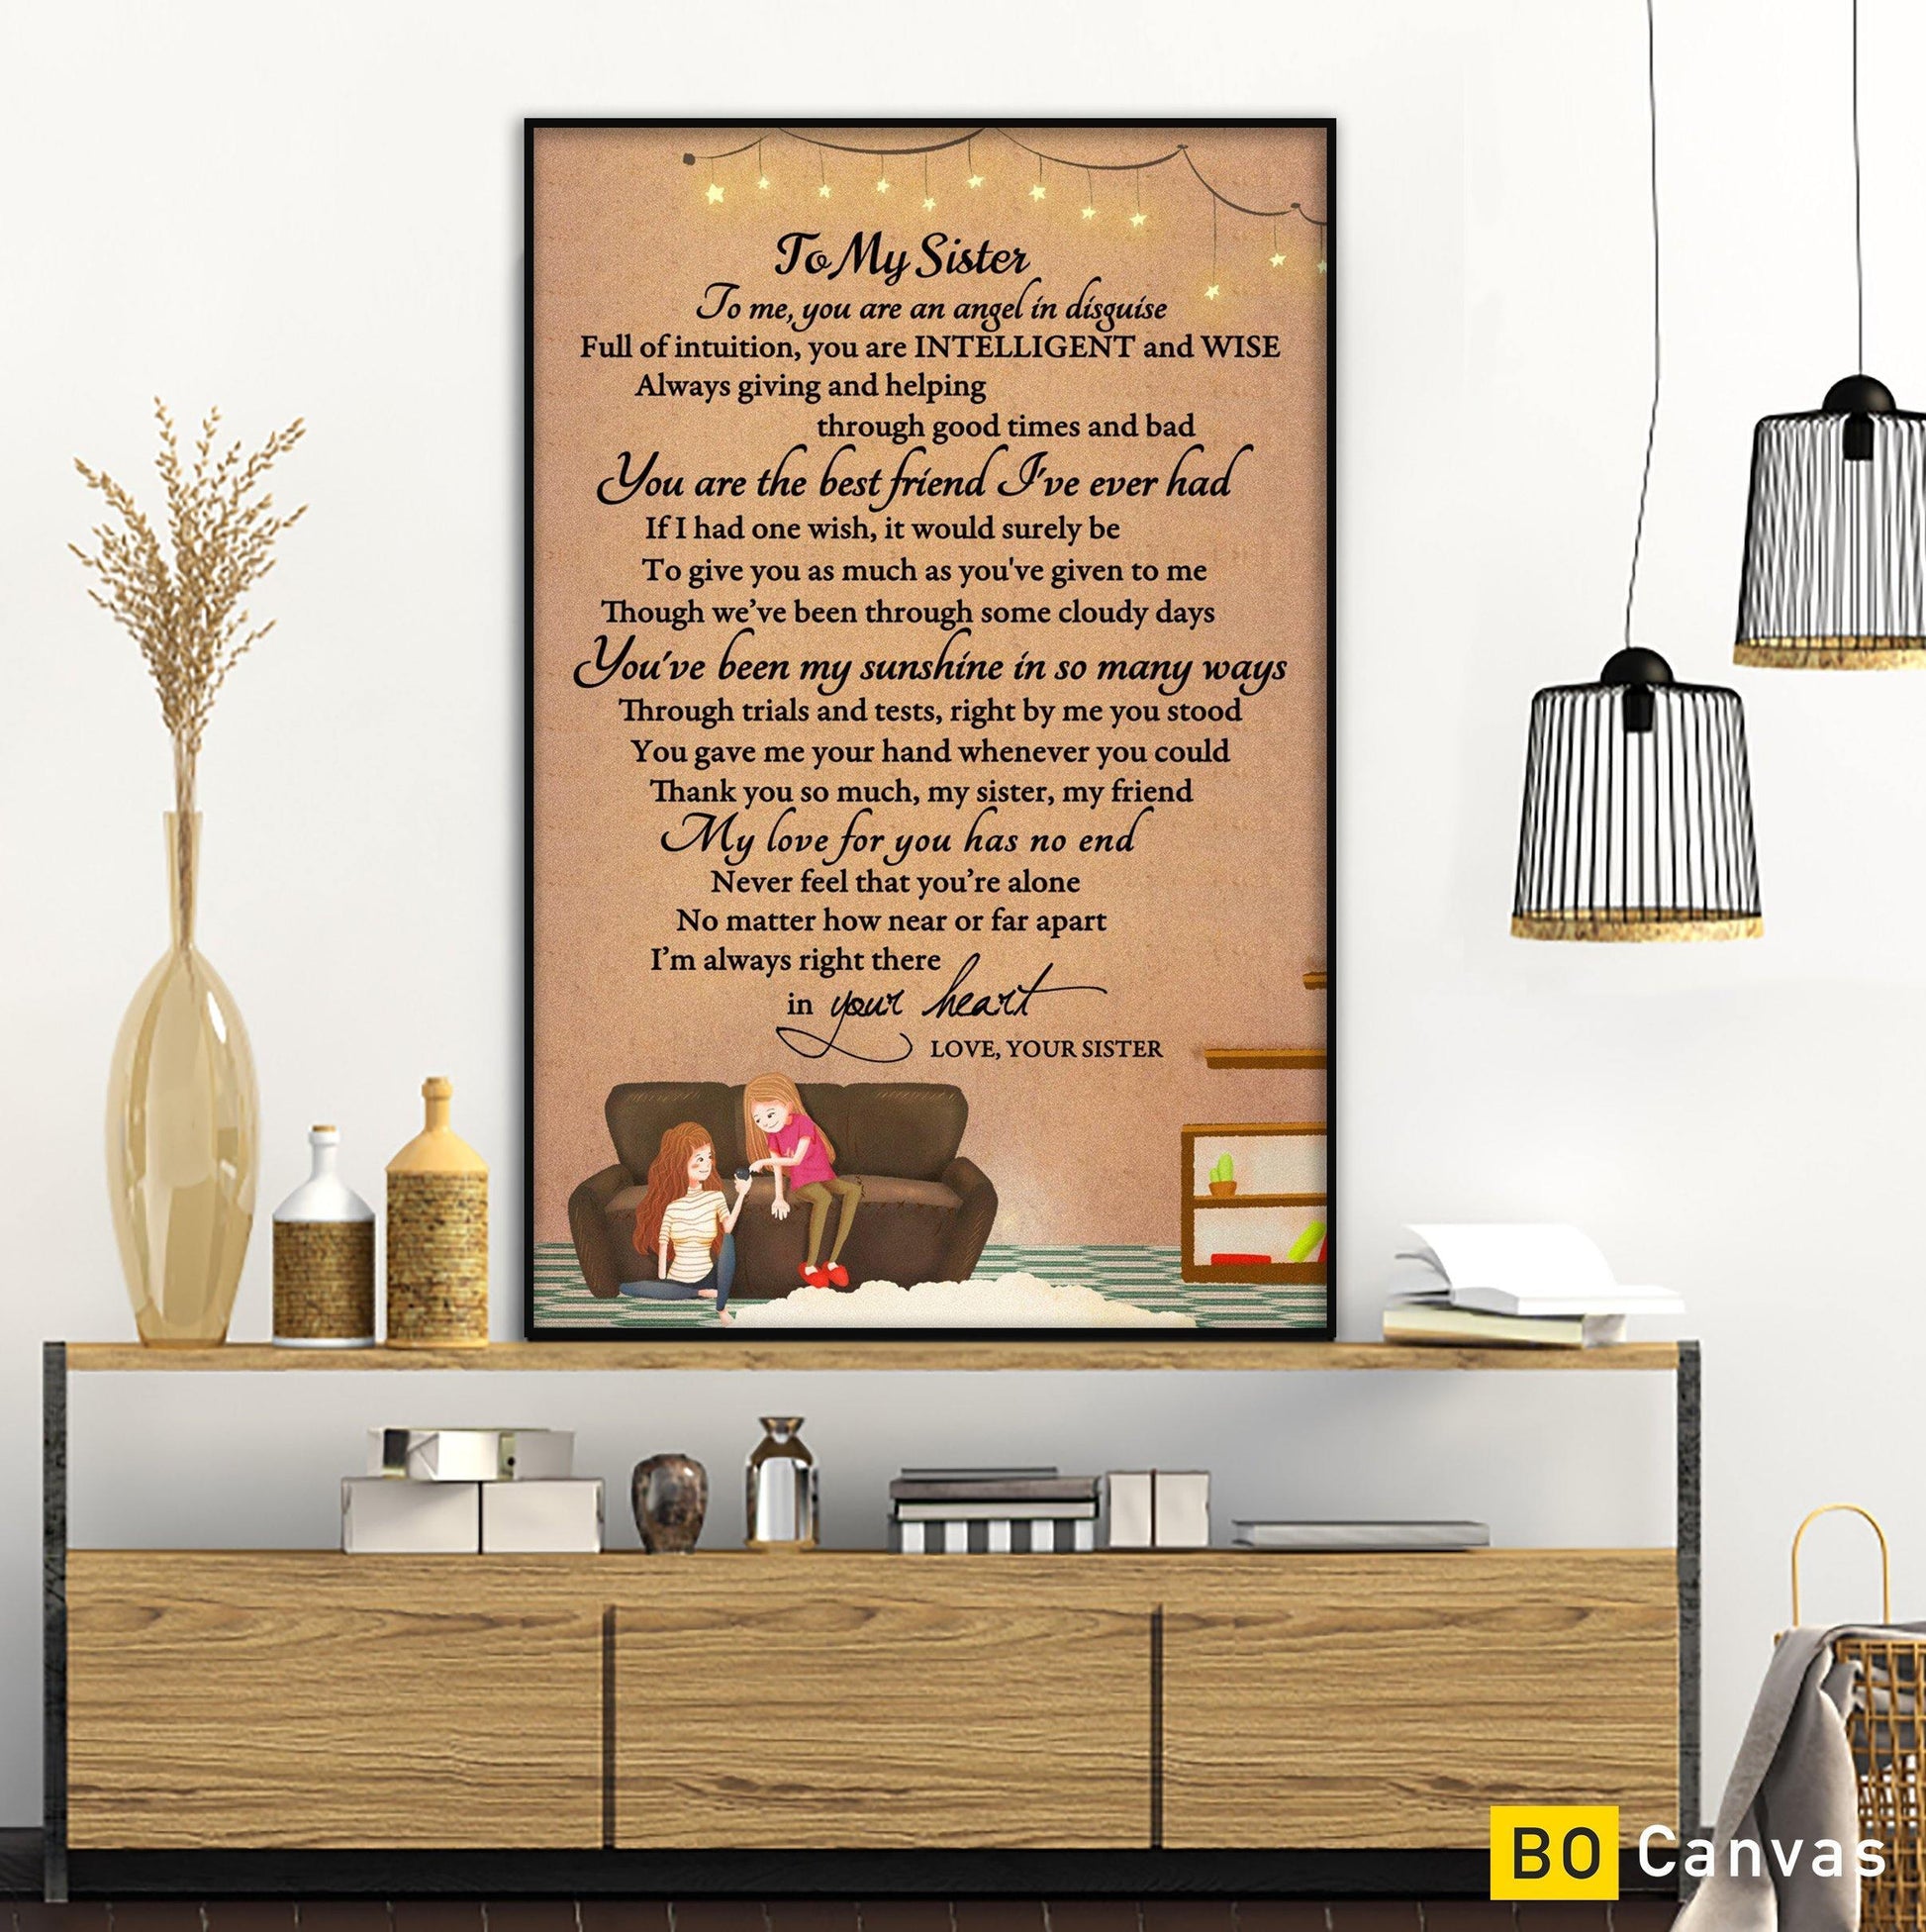 To My Sister - Love From Your Sister - Framed Canvas Gift SS001 - DivesArt LLC